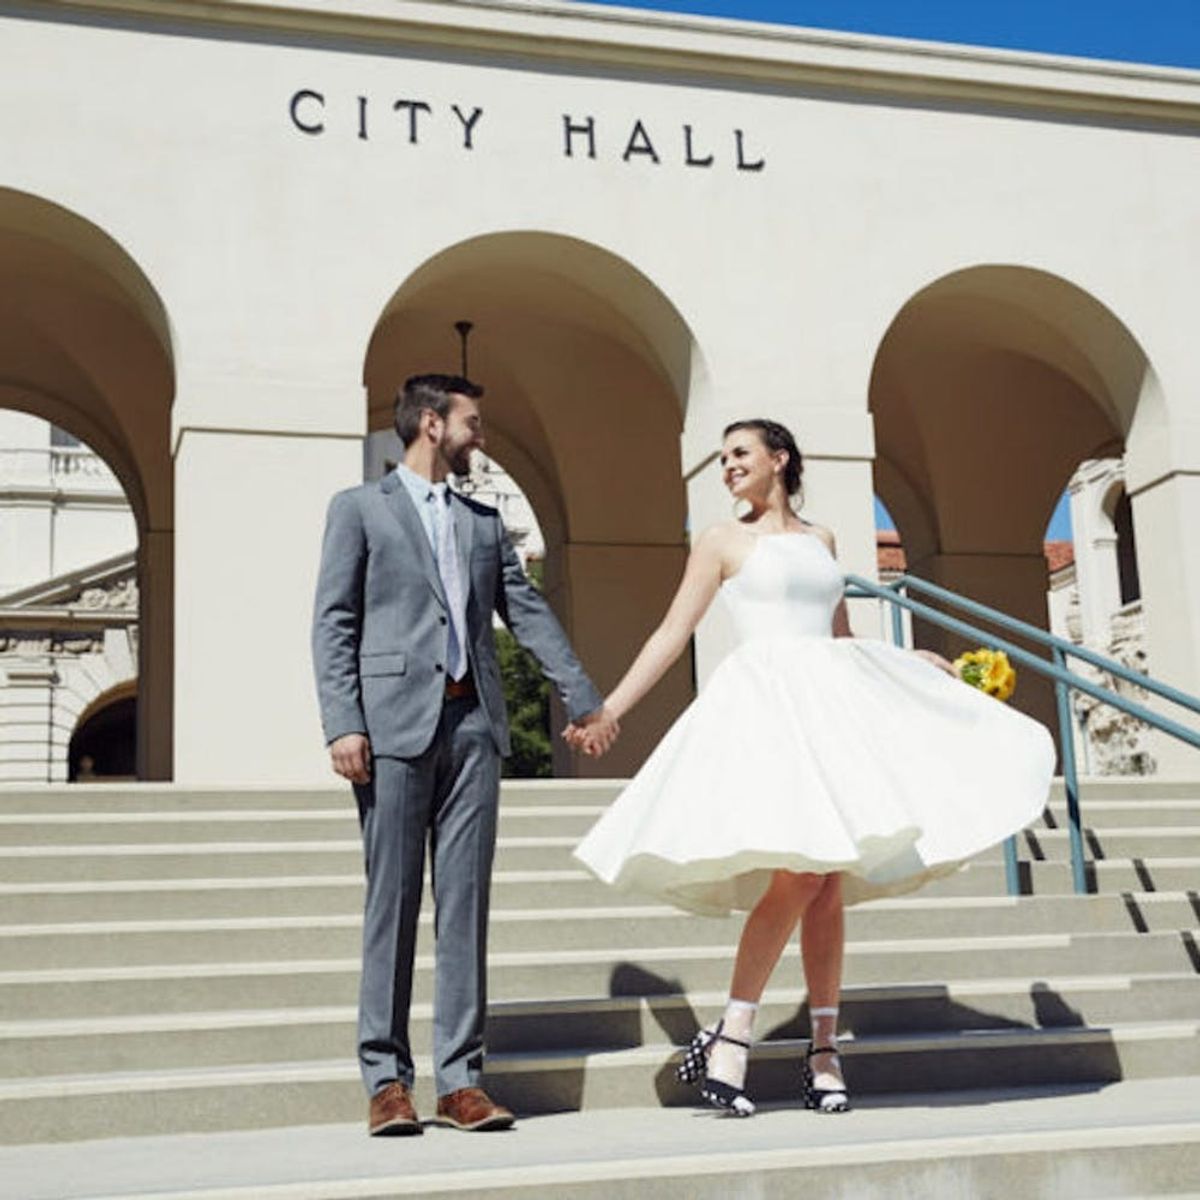 This ModCloth Bride’s City Hall Wedding Is Old School Cool